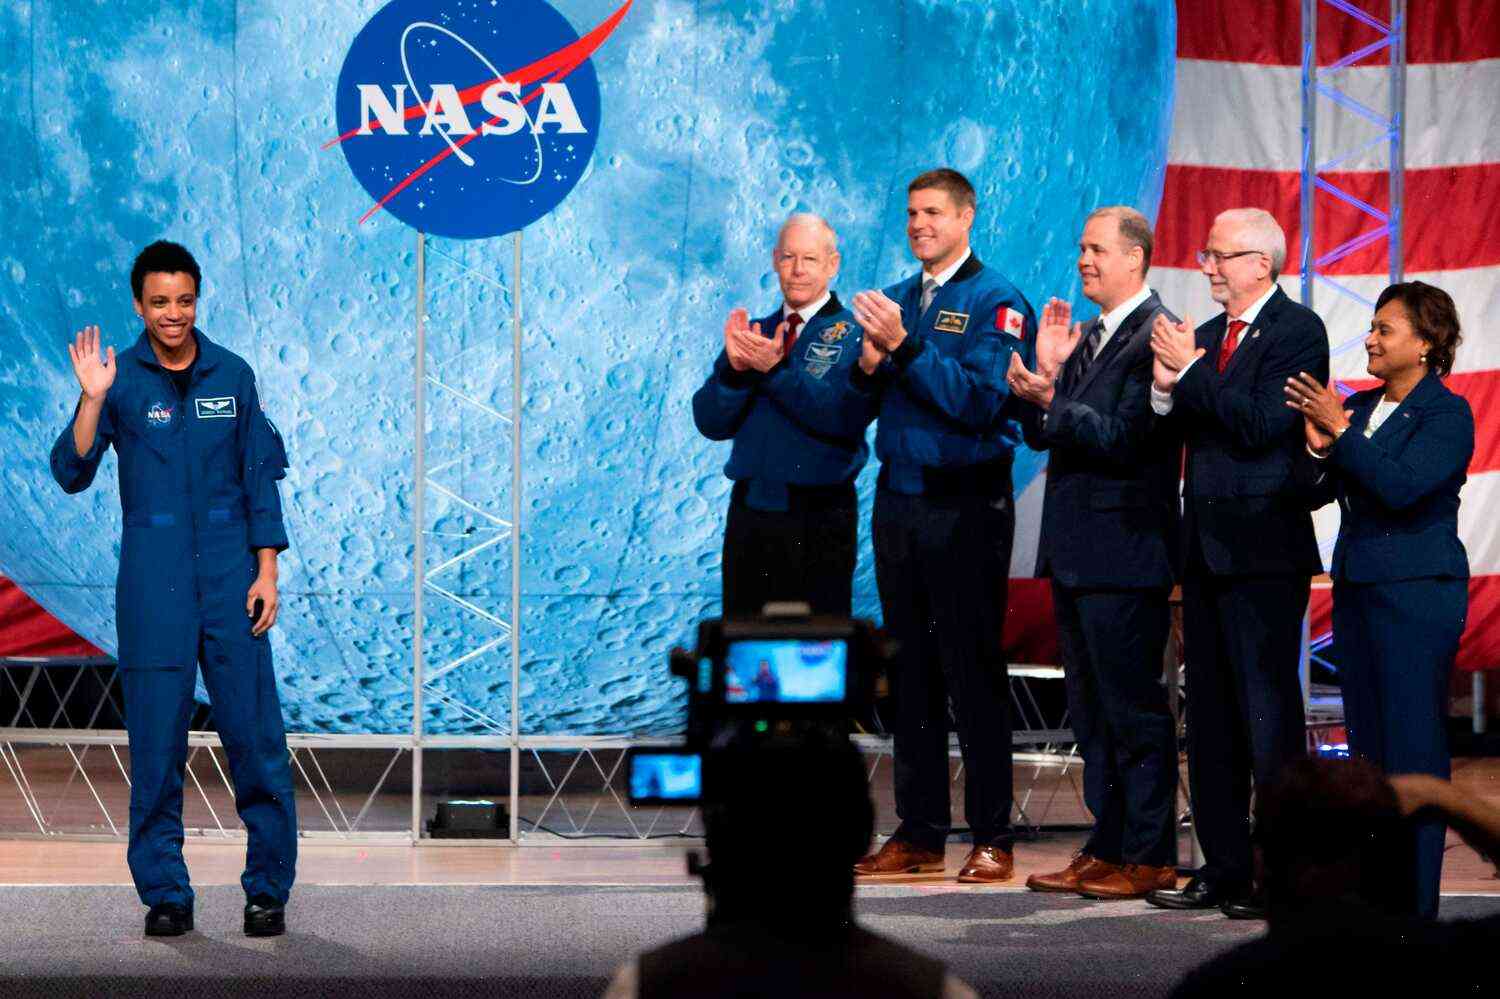 'A Dream of Mine': Astronaut's Crewmates Celebrate Her 'Dream' of Making History